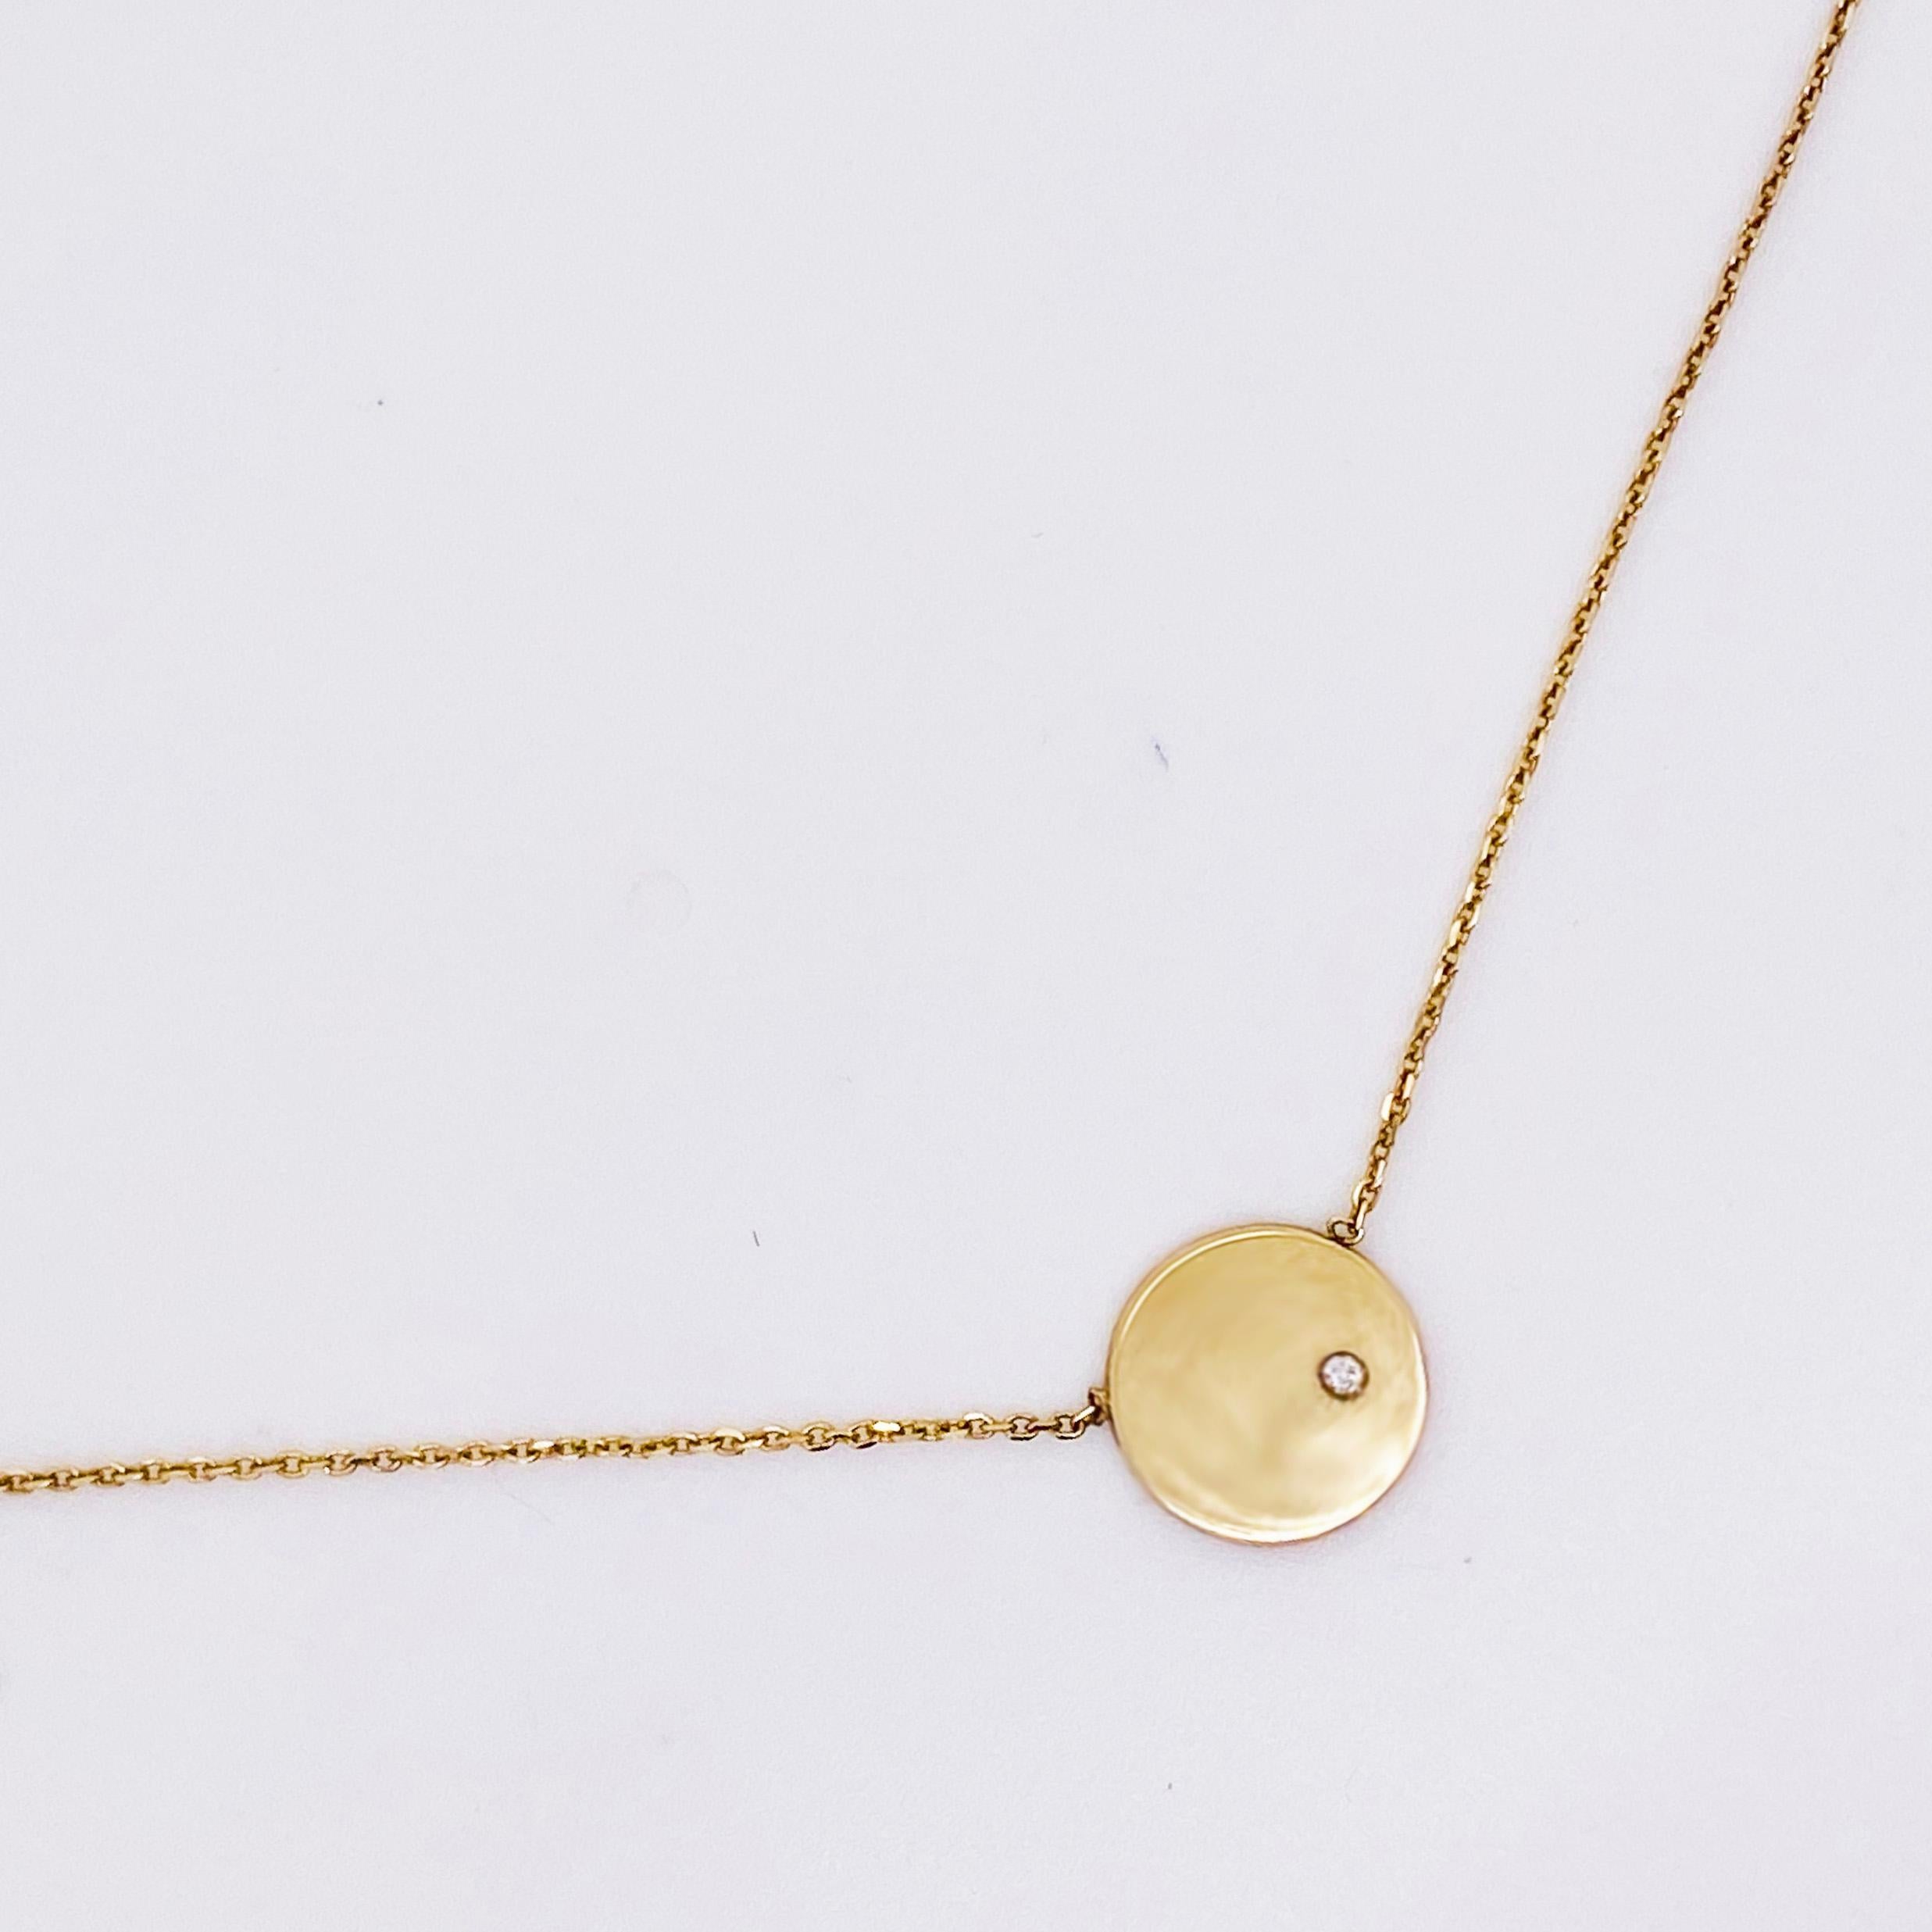 This 14K Yellow Gold Disk has a genuine, natural diamond set off-center.  The disk is about 1/2 the size of a dime and The chain is an adjustable solid 14 karat yellow gold.  The 14 karat yellow gold cable chain is 16 to 18 inches long and has the